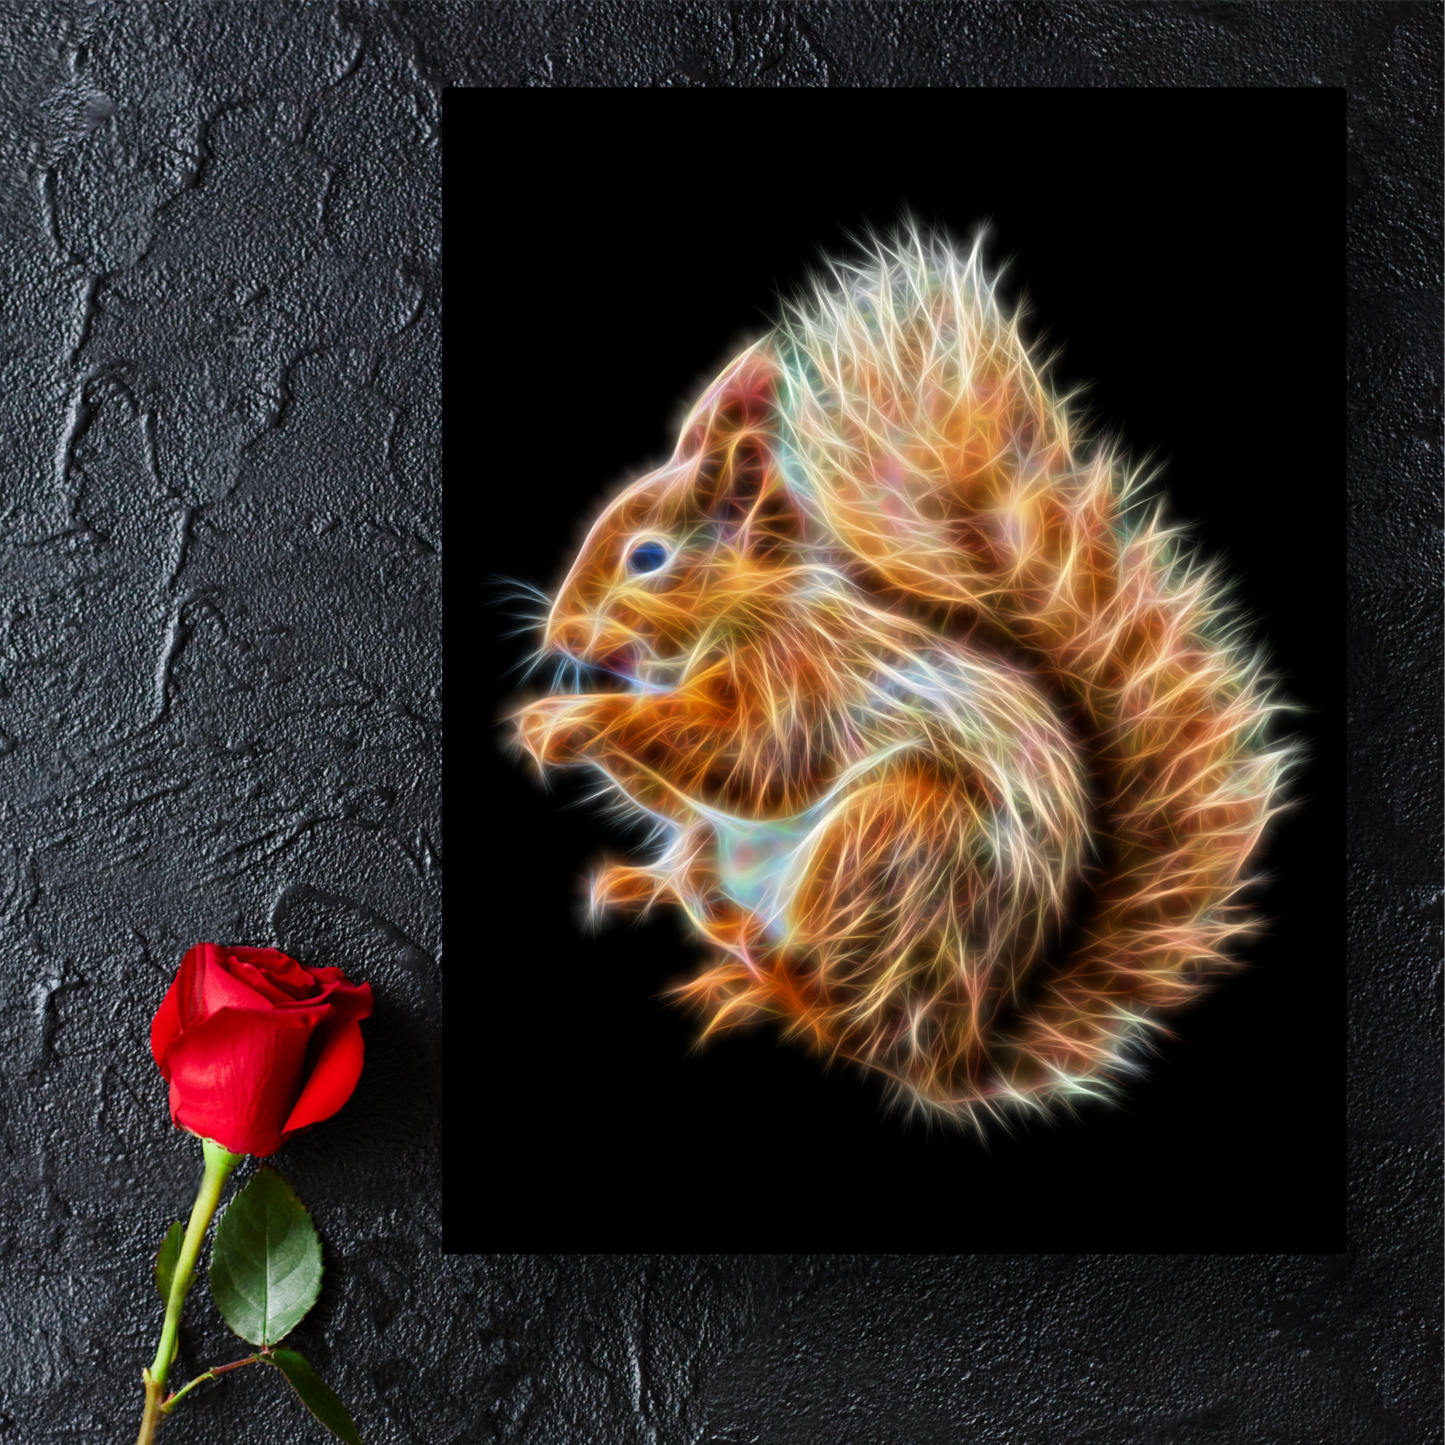 Red Squirrel Metal Wall Plaque with Stunning Fractal Art Design